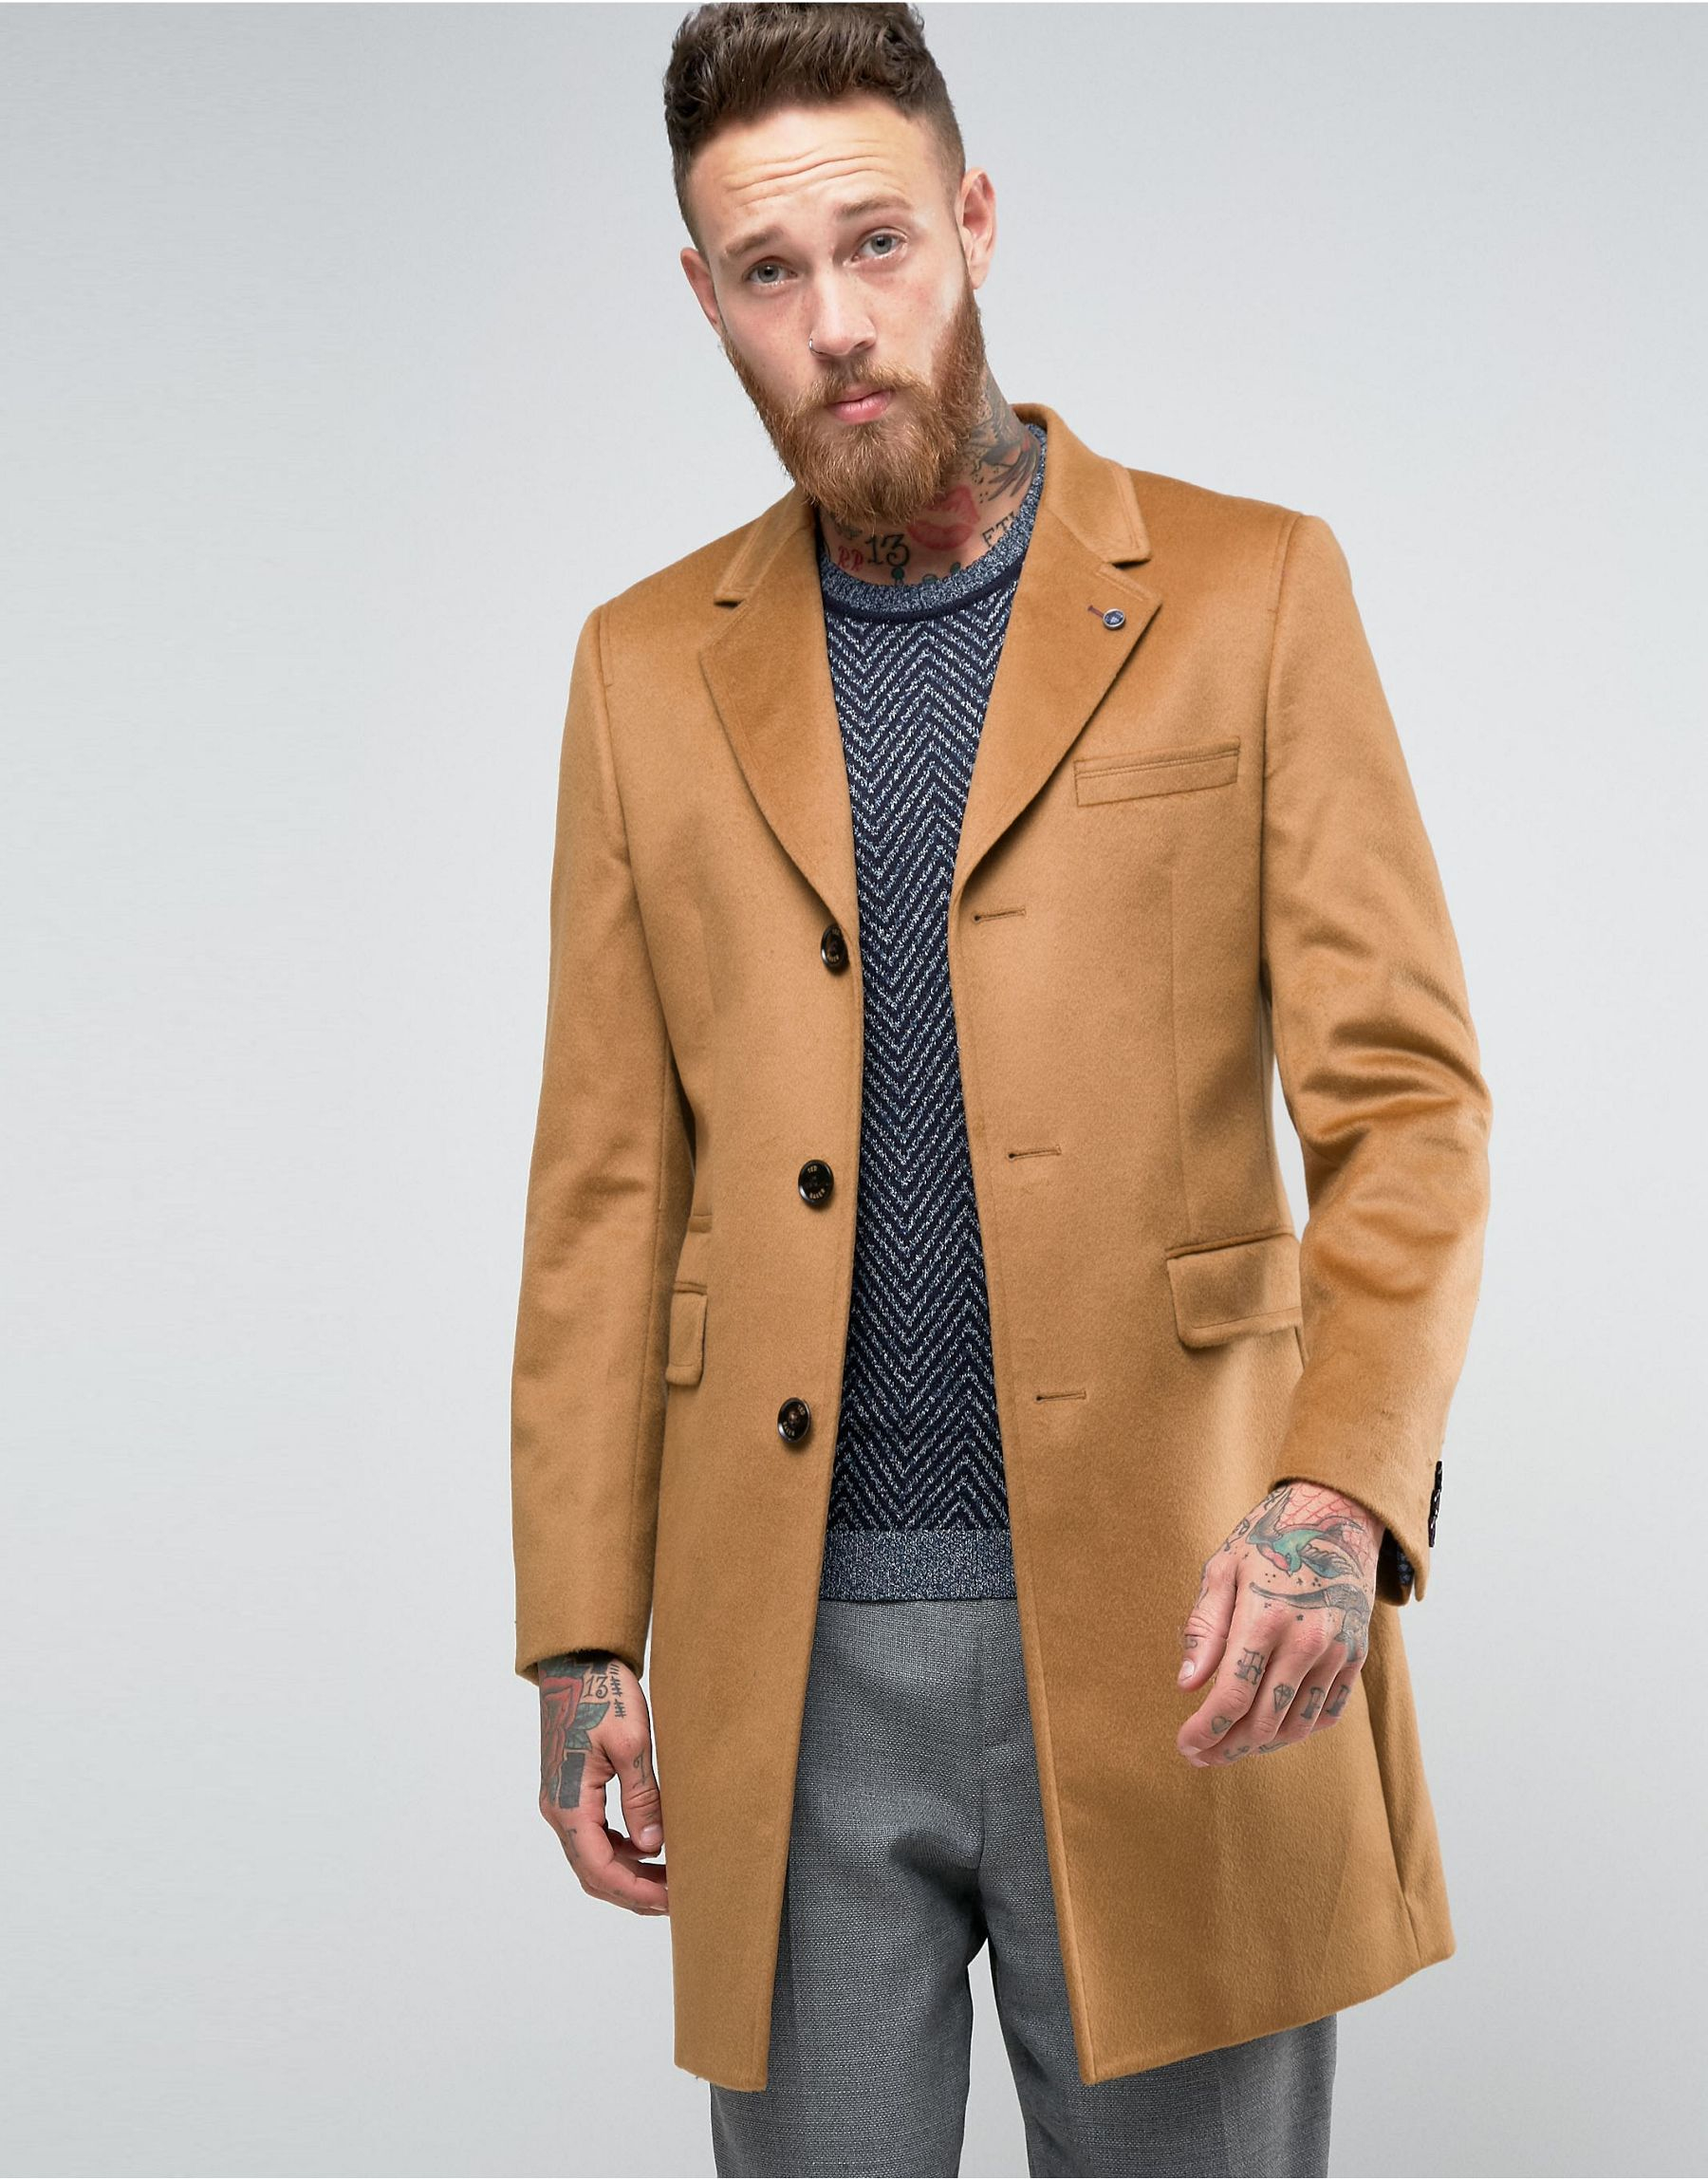 Ted Baker Cashmere Mix Overcoat In Camel for Men - Lyst